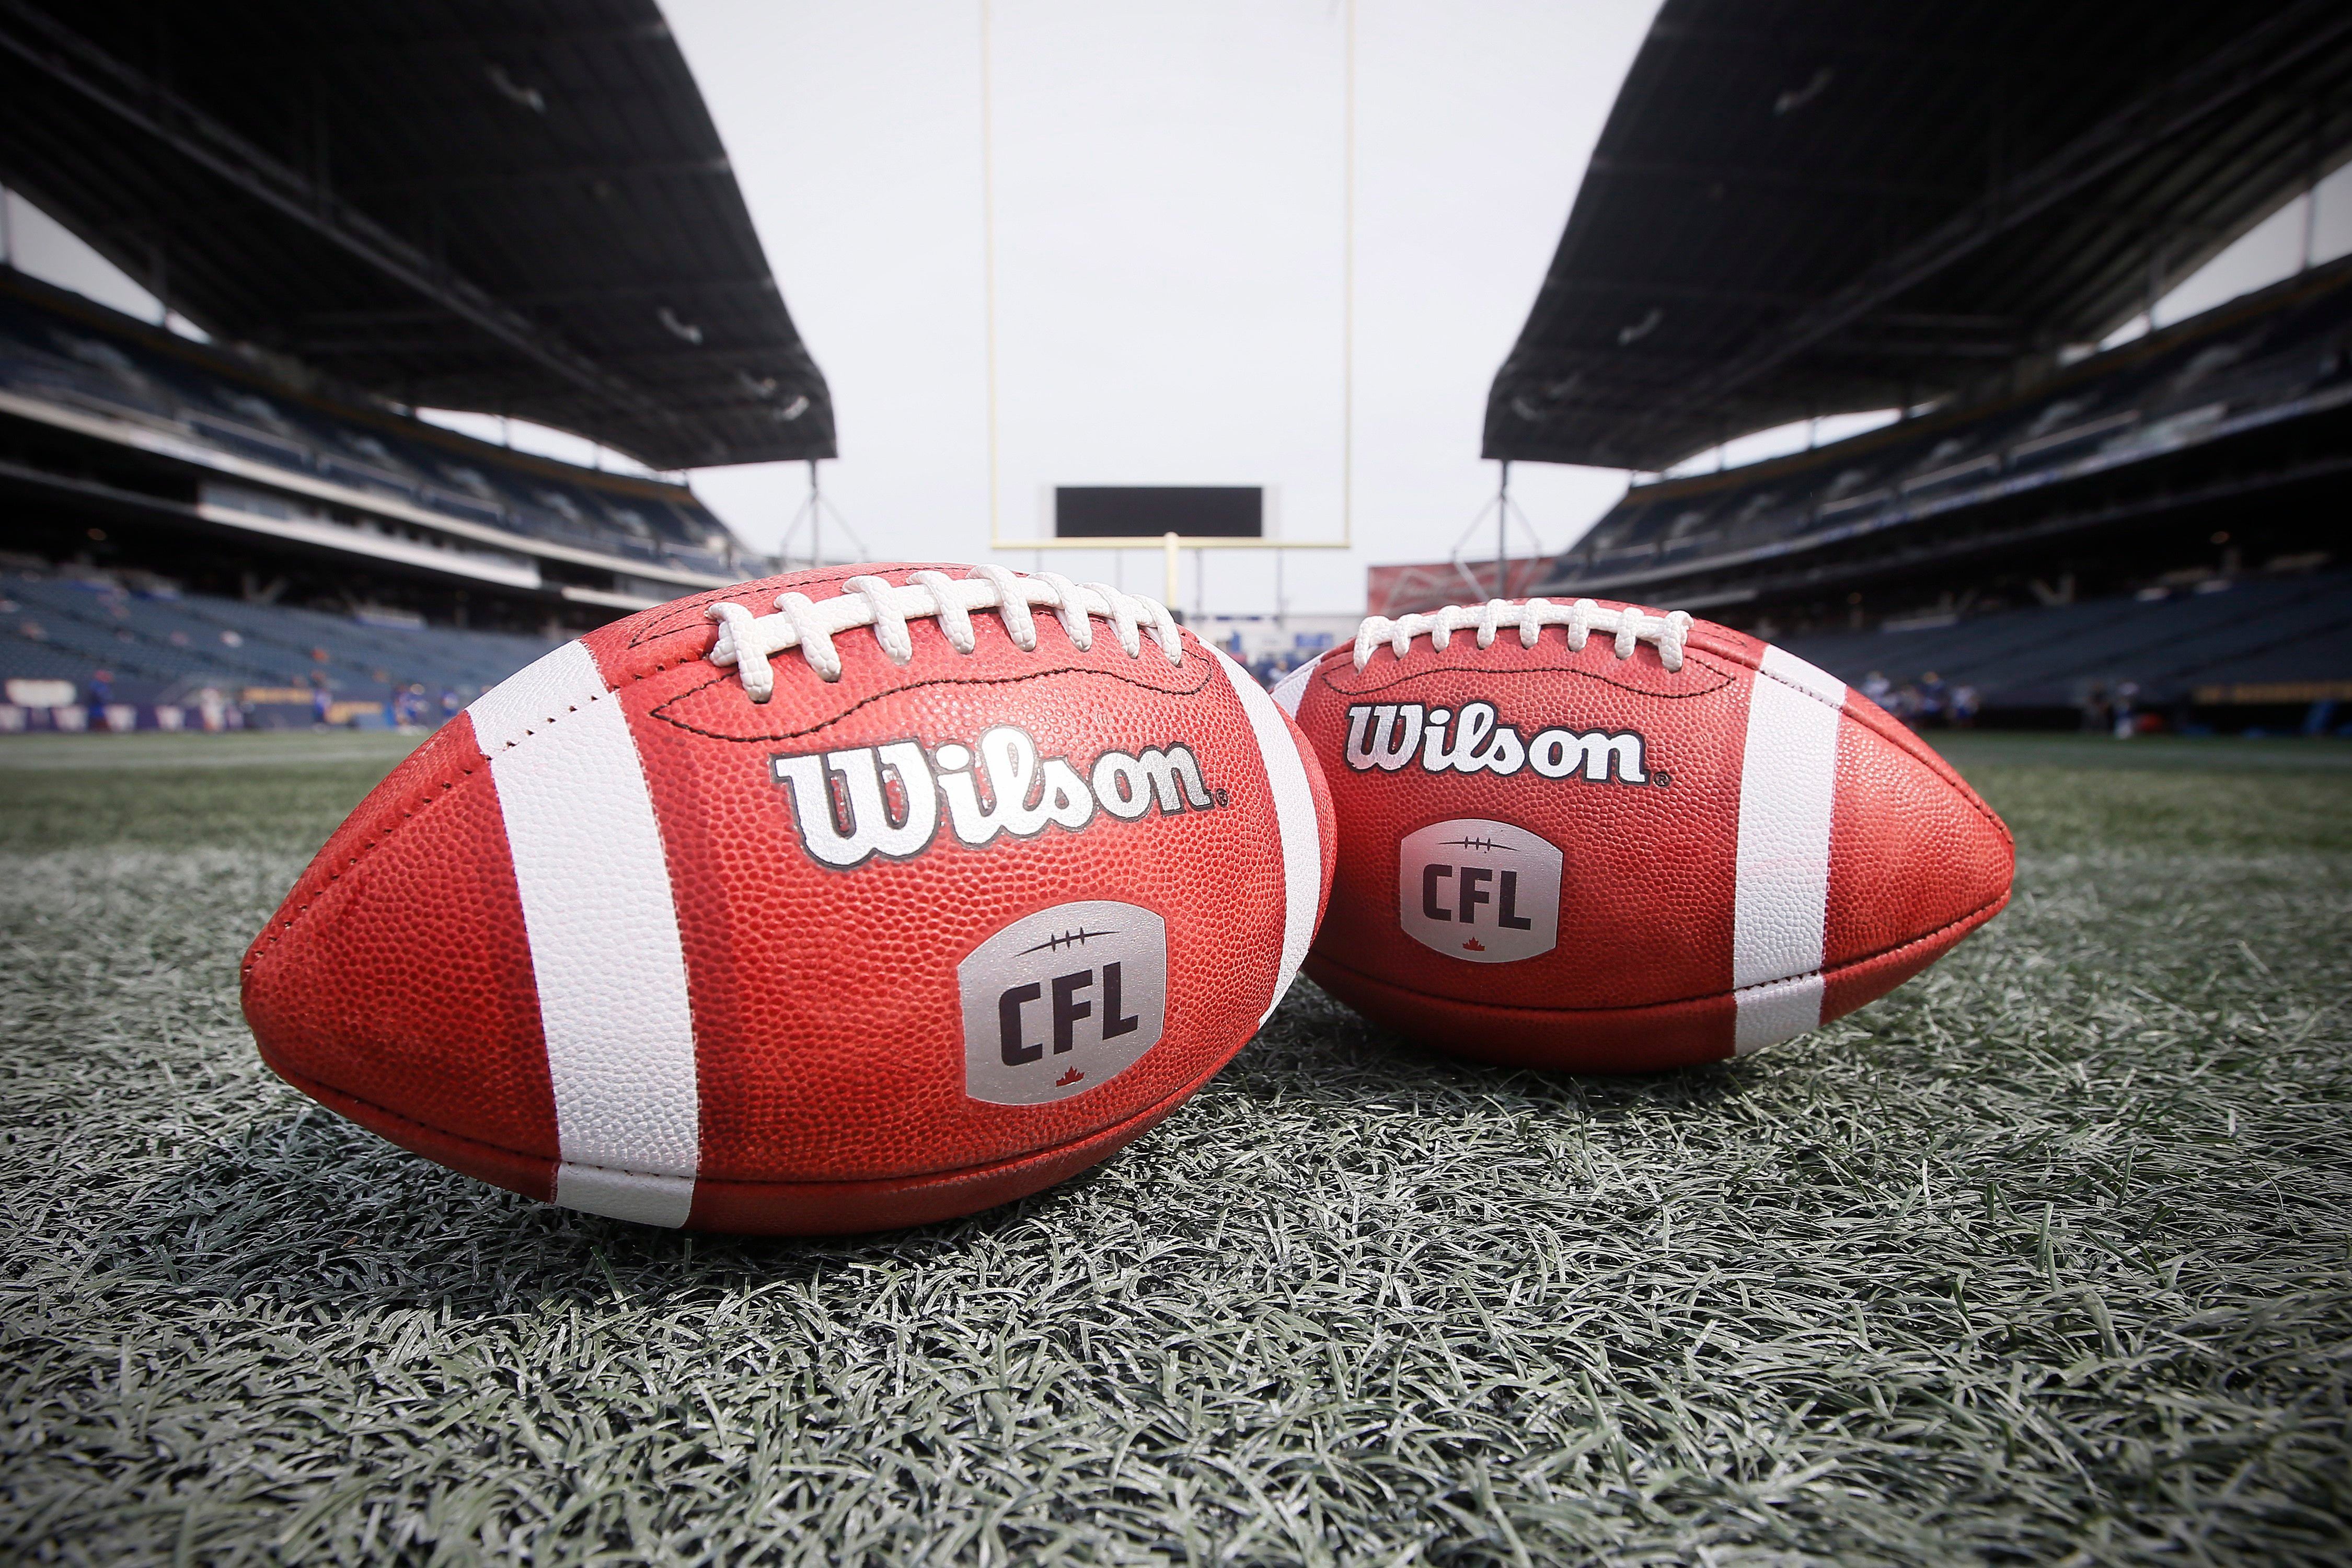 CFL players weigh in on league's 'harder' new balls - The Globe and Mail